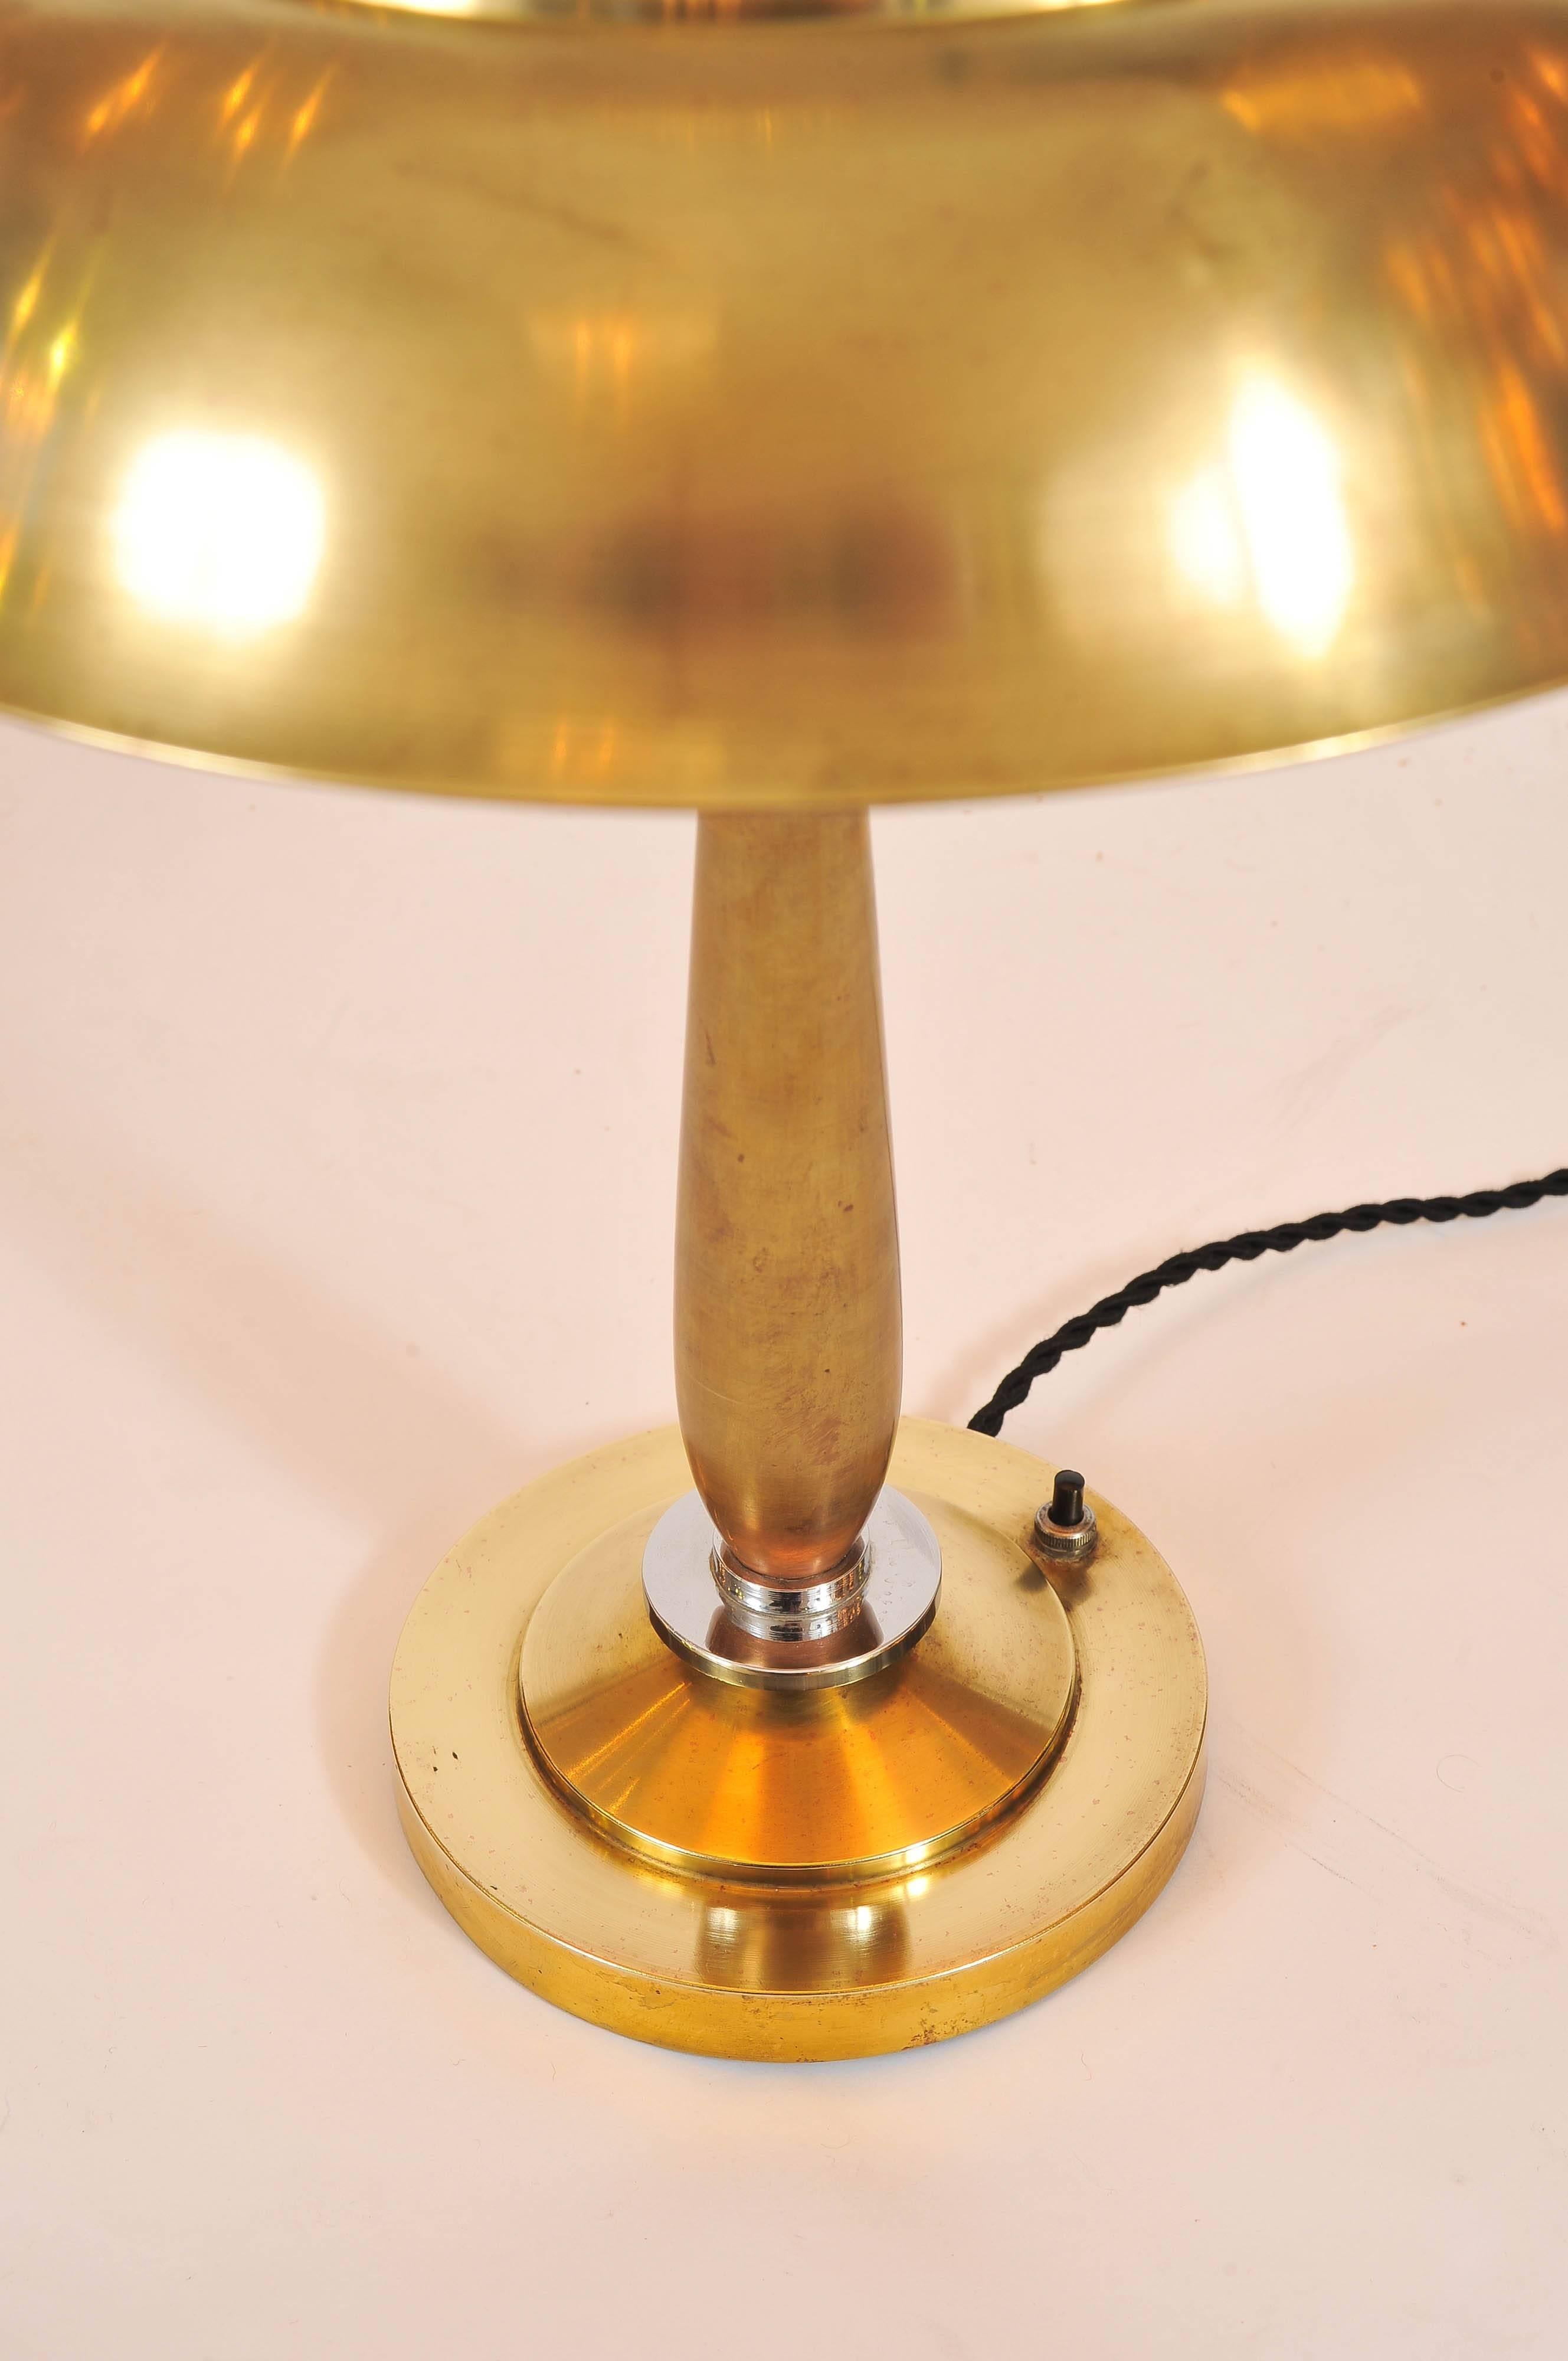 Beautifully detailed domed lamp. The body and dome are made of brass while there are chrome and copper details on the main support. Topped with a small ribbed glass dome.